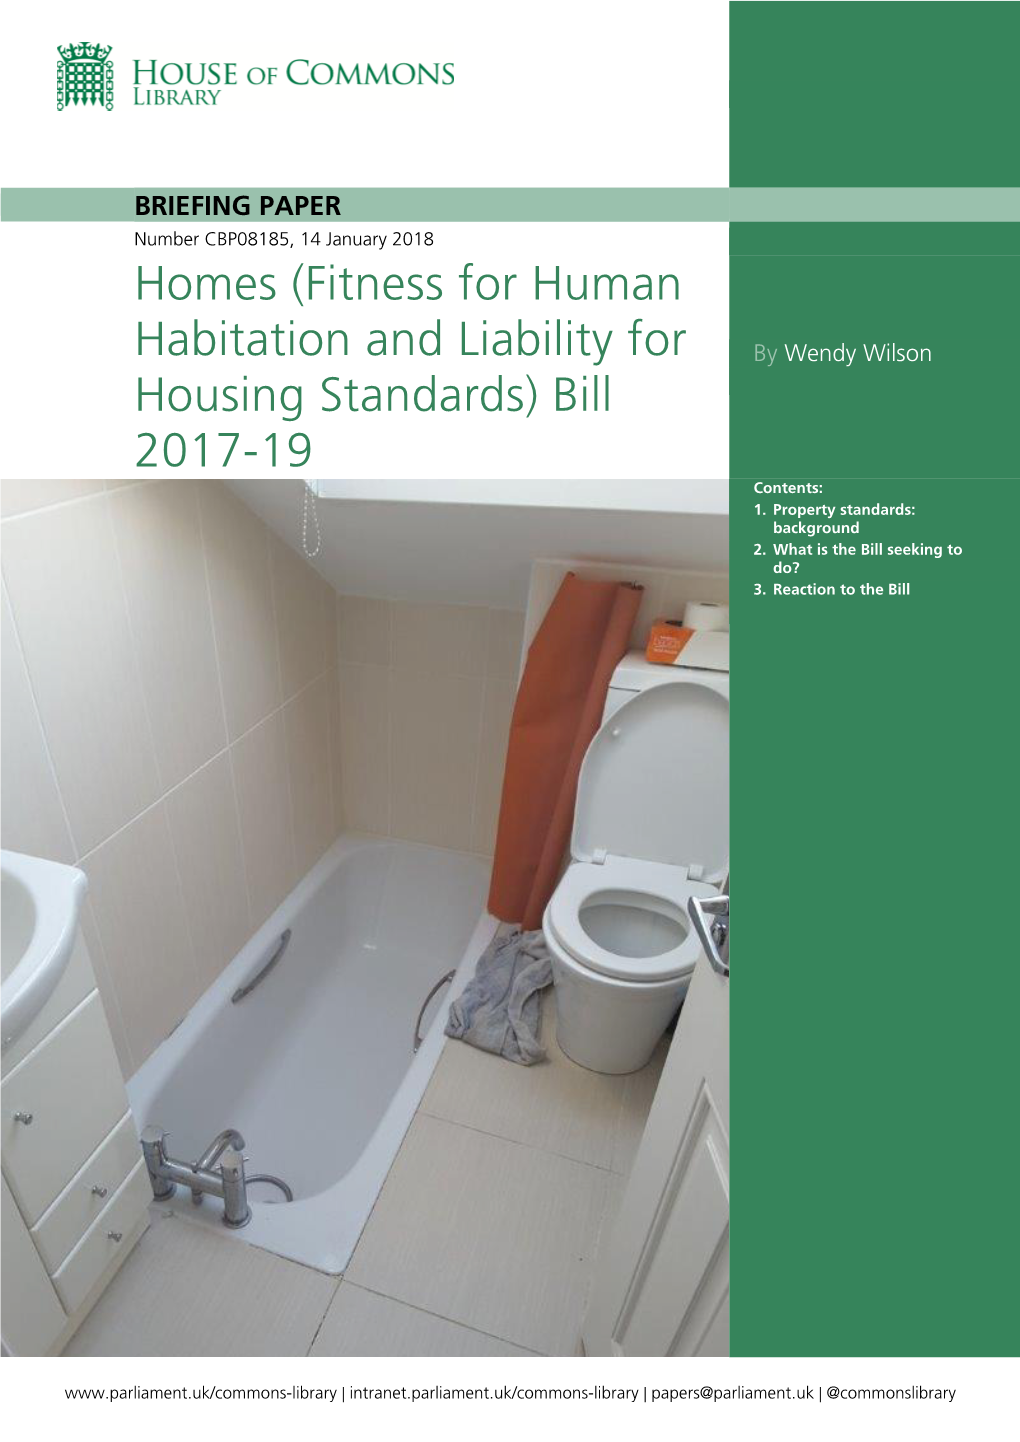 Homes (Fitness for Human Habitation and Liability for Housing Standards) Bill 2017-19